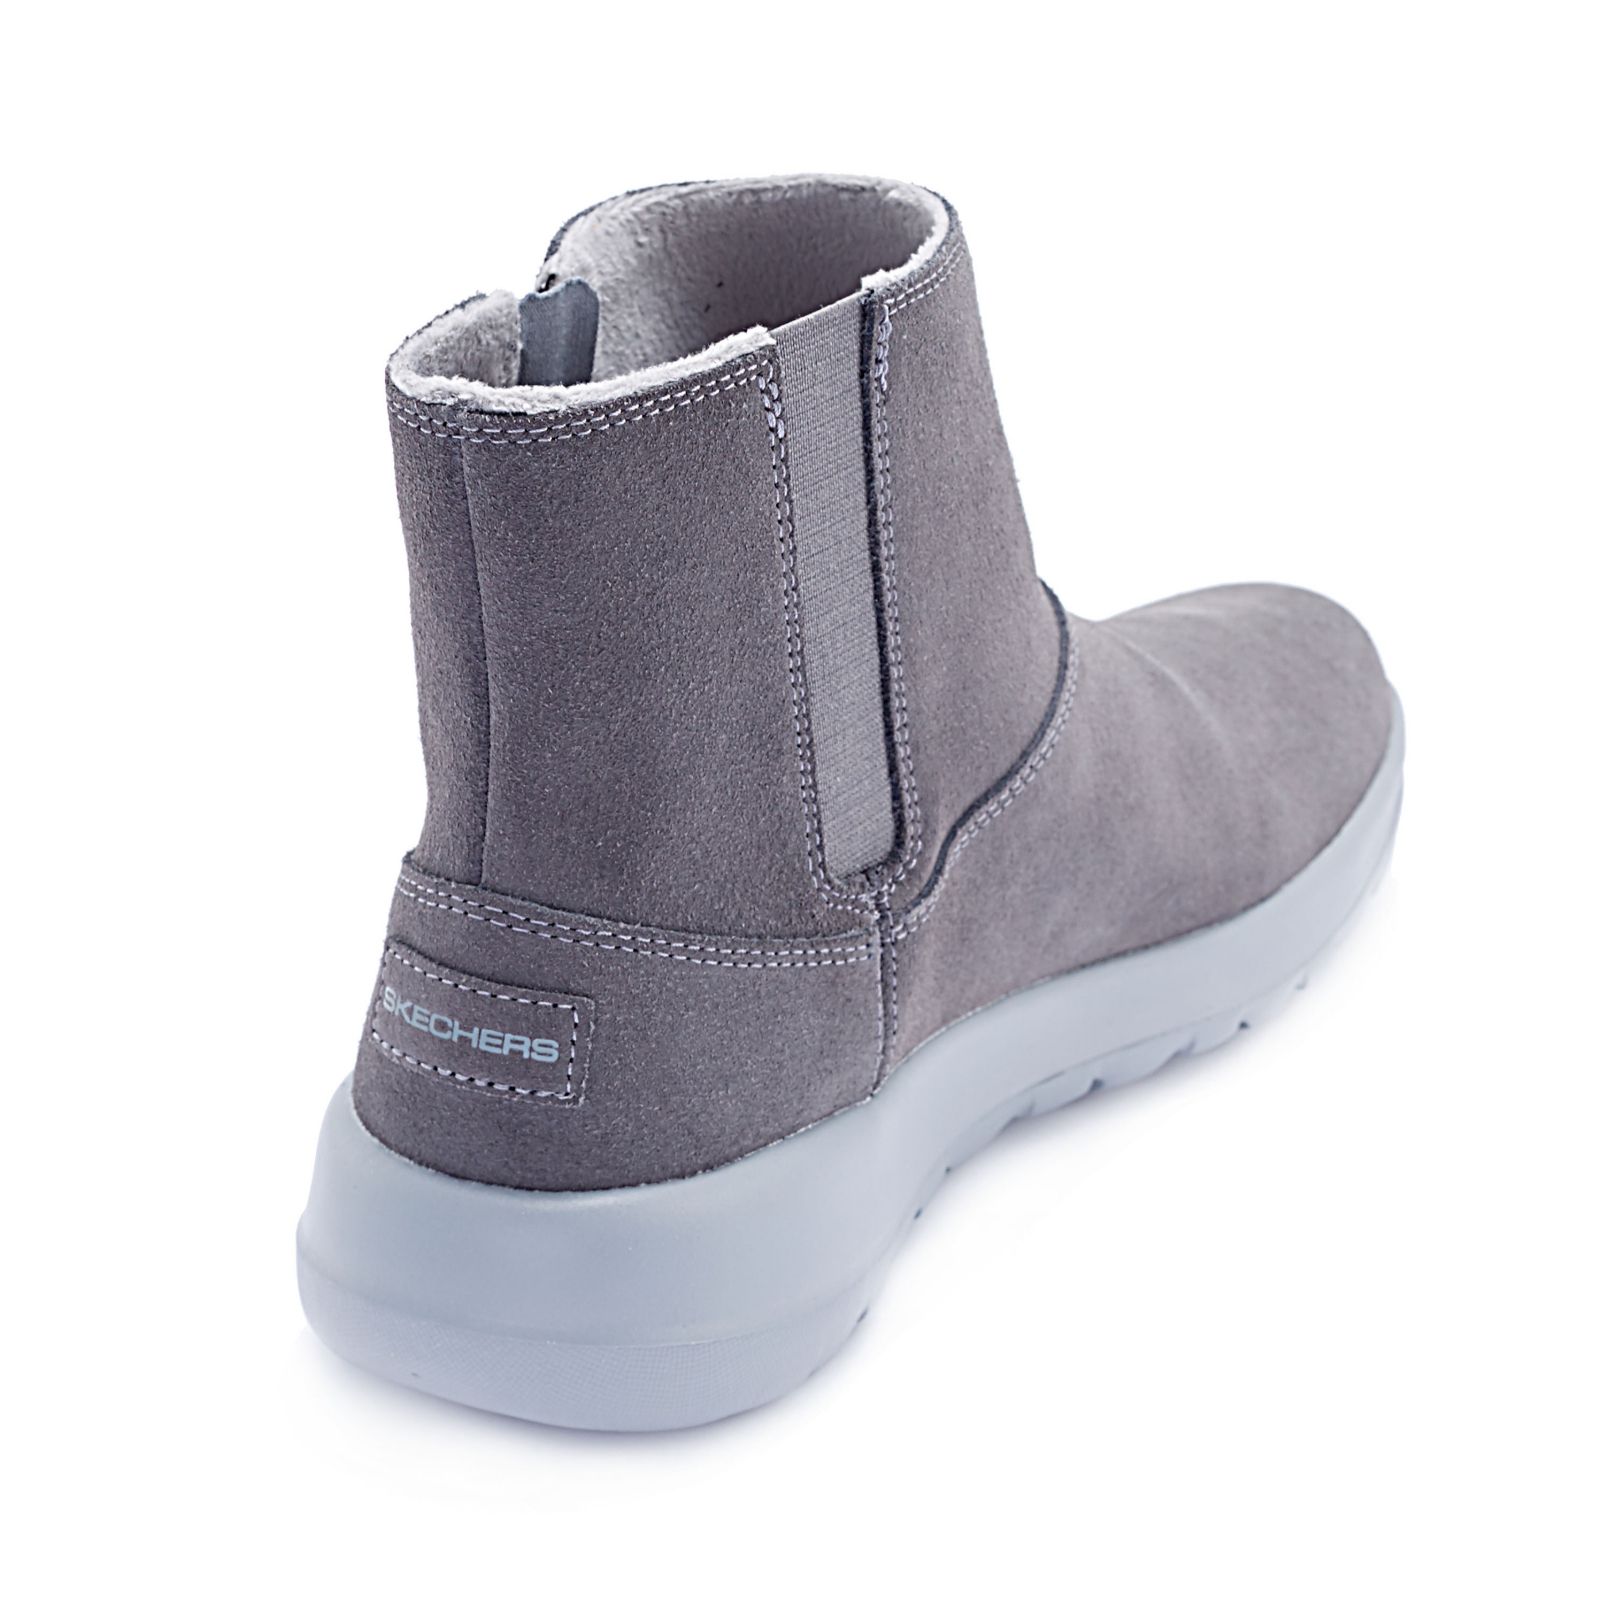 skechers suede zip ankle boot with faux fur